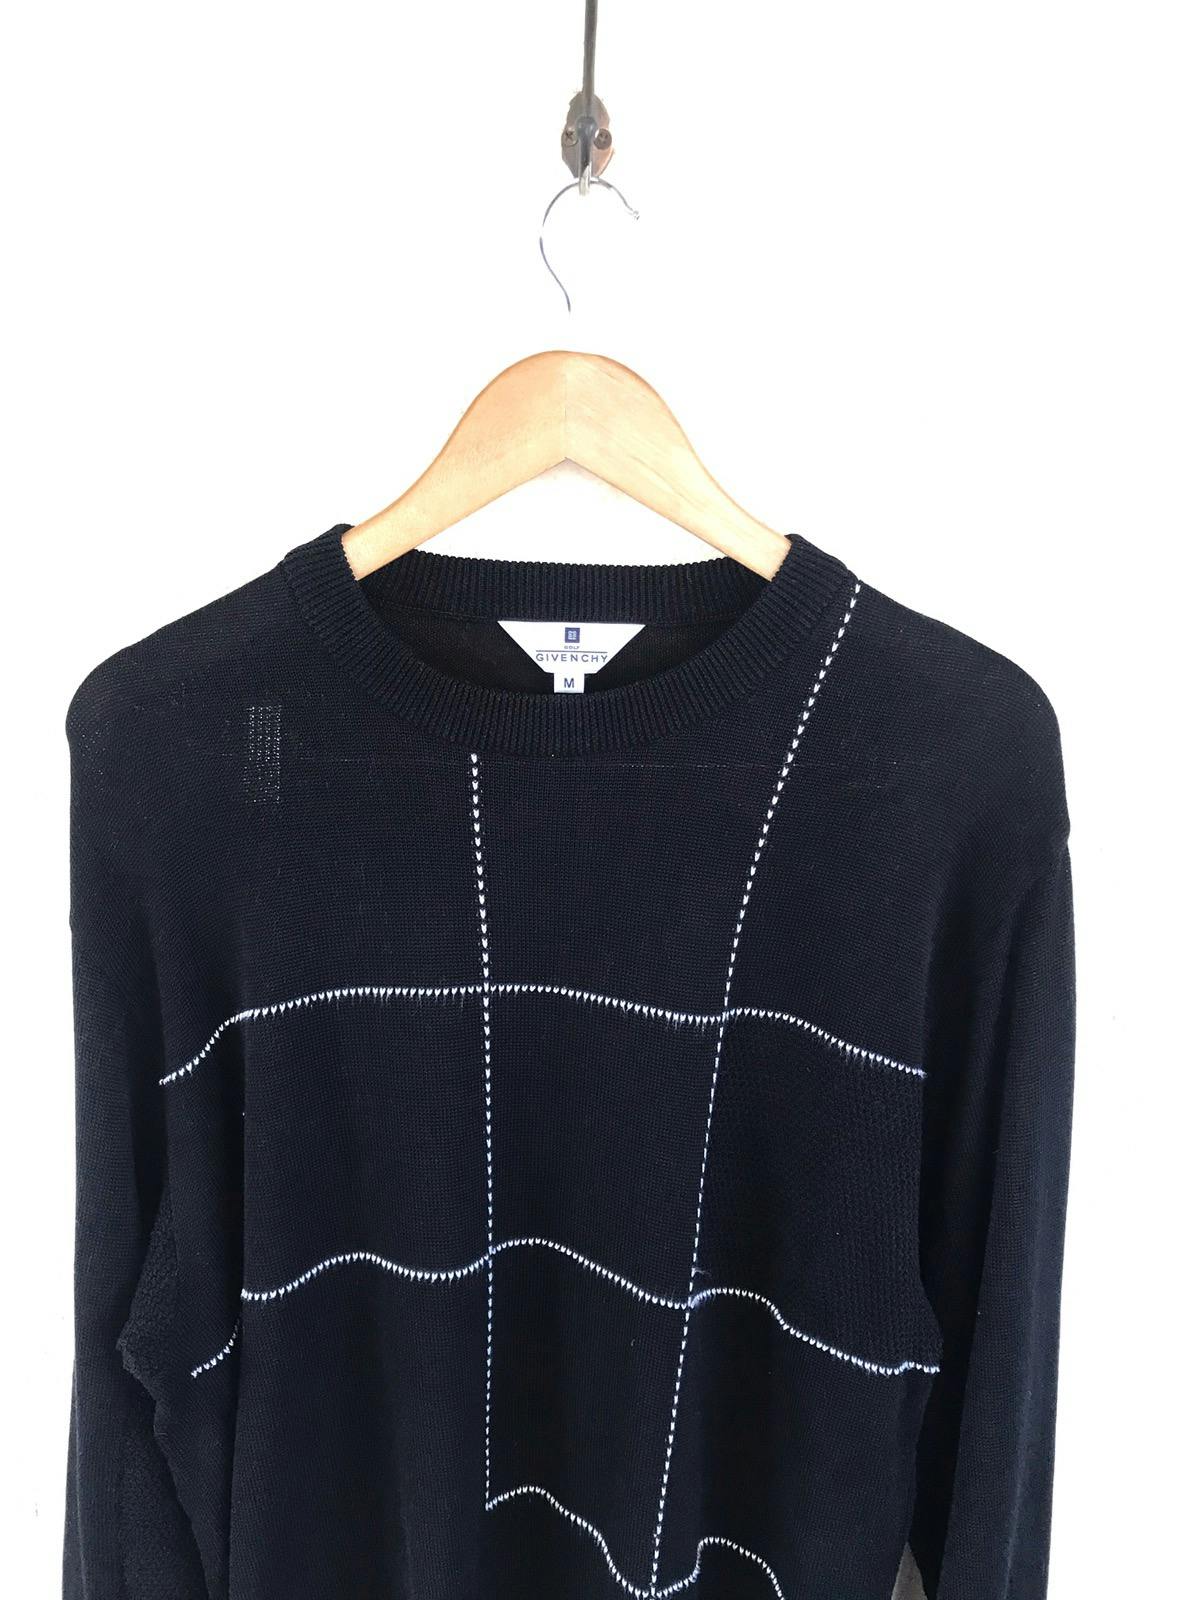 Givenchy Golf Small Logo Knit Sweater - 2